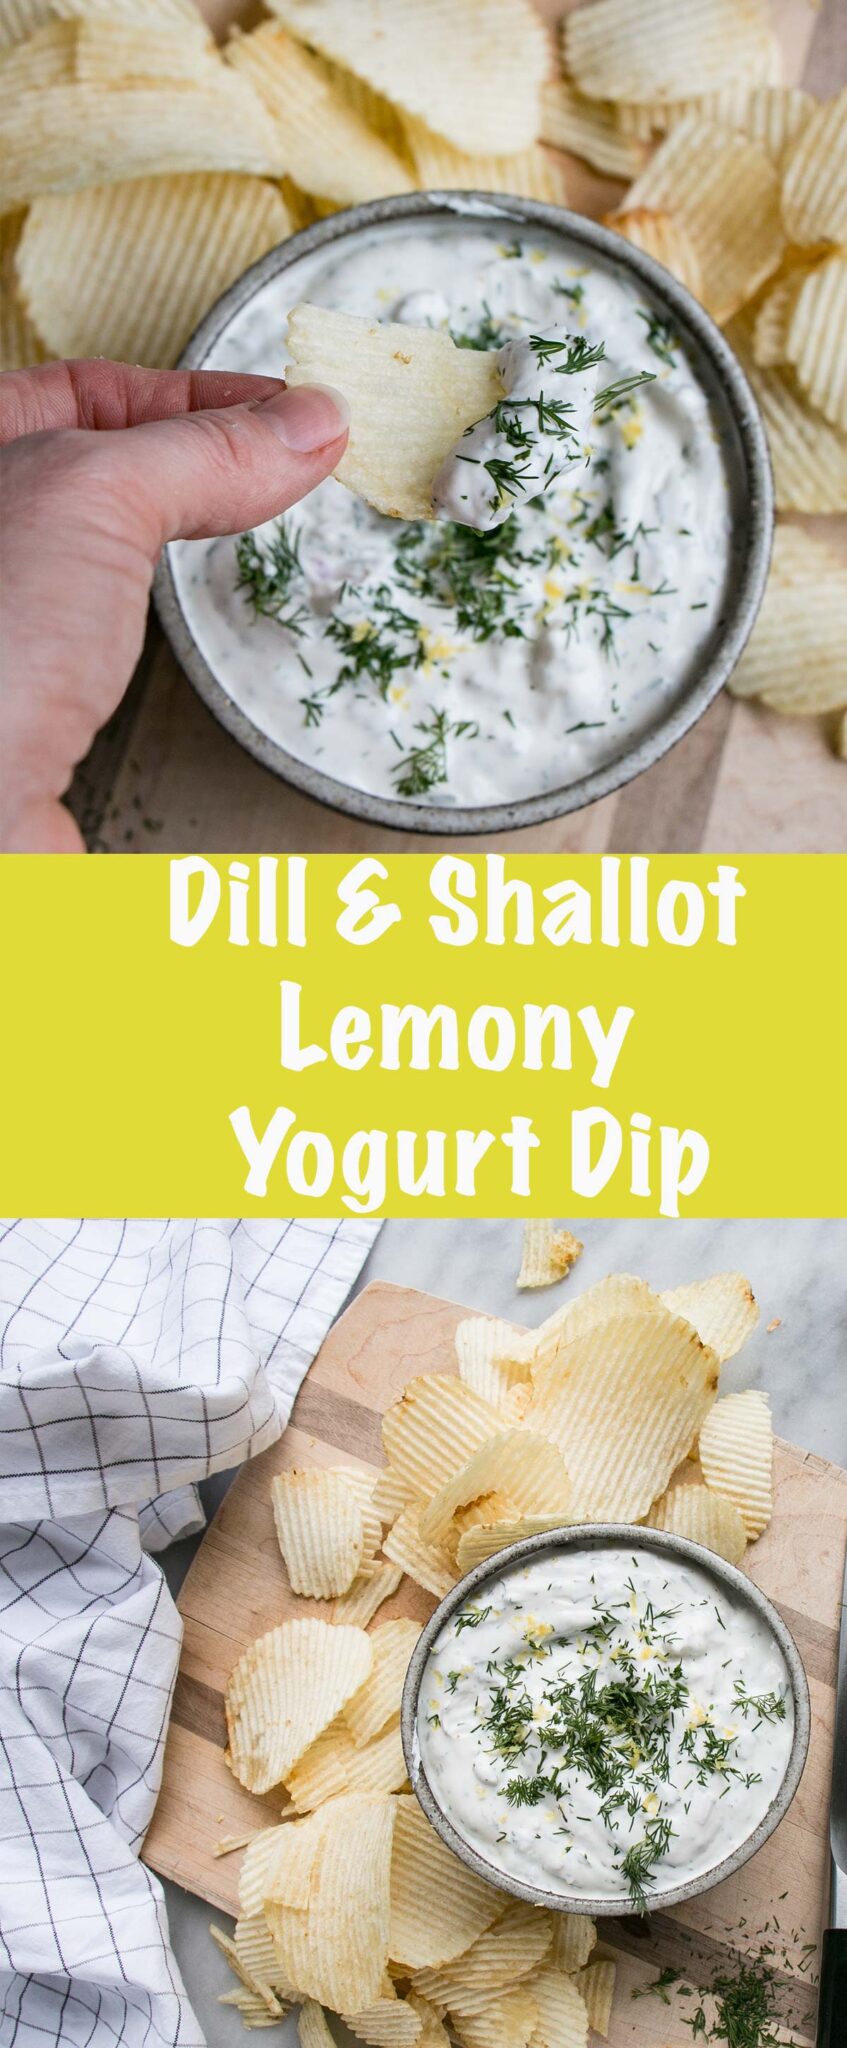 Dilly Shallot Yogurt Chip Dip for the perfect side to chips! Light, lemony, and packed with dill and shallot, this dip won't weigh you down. #dip #gameday #appetizer